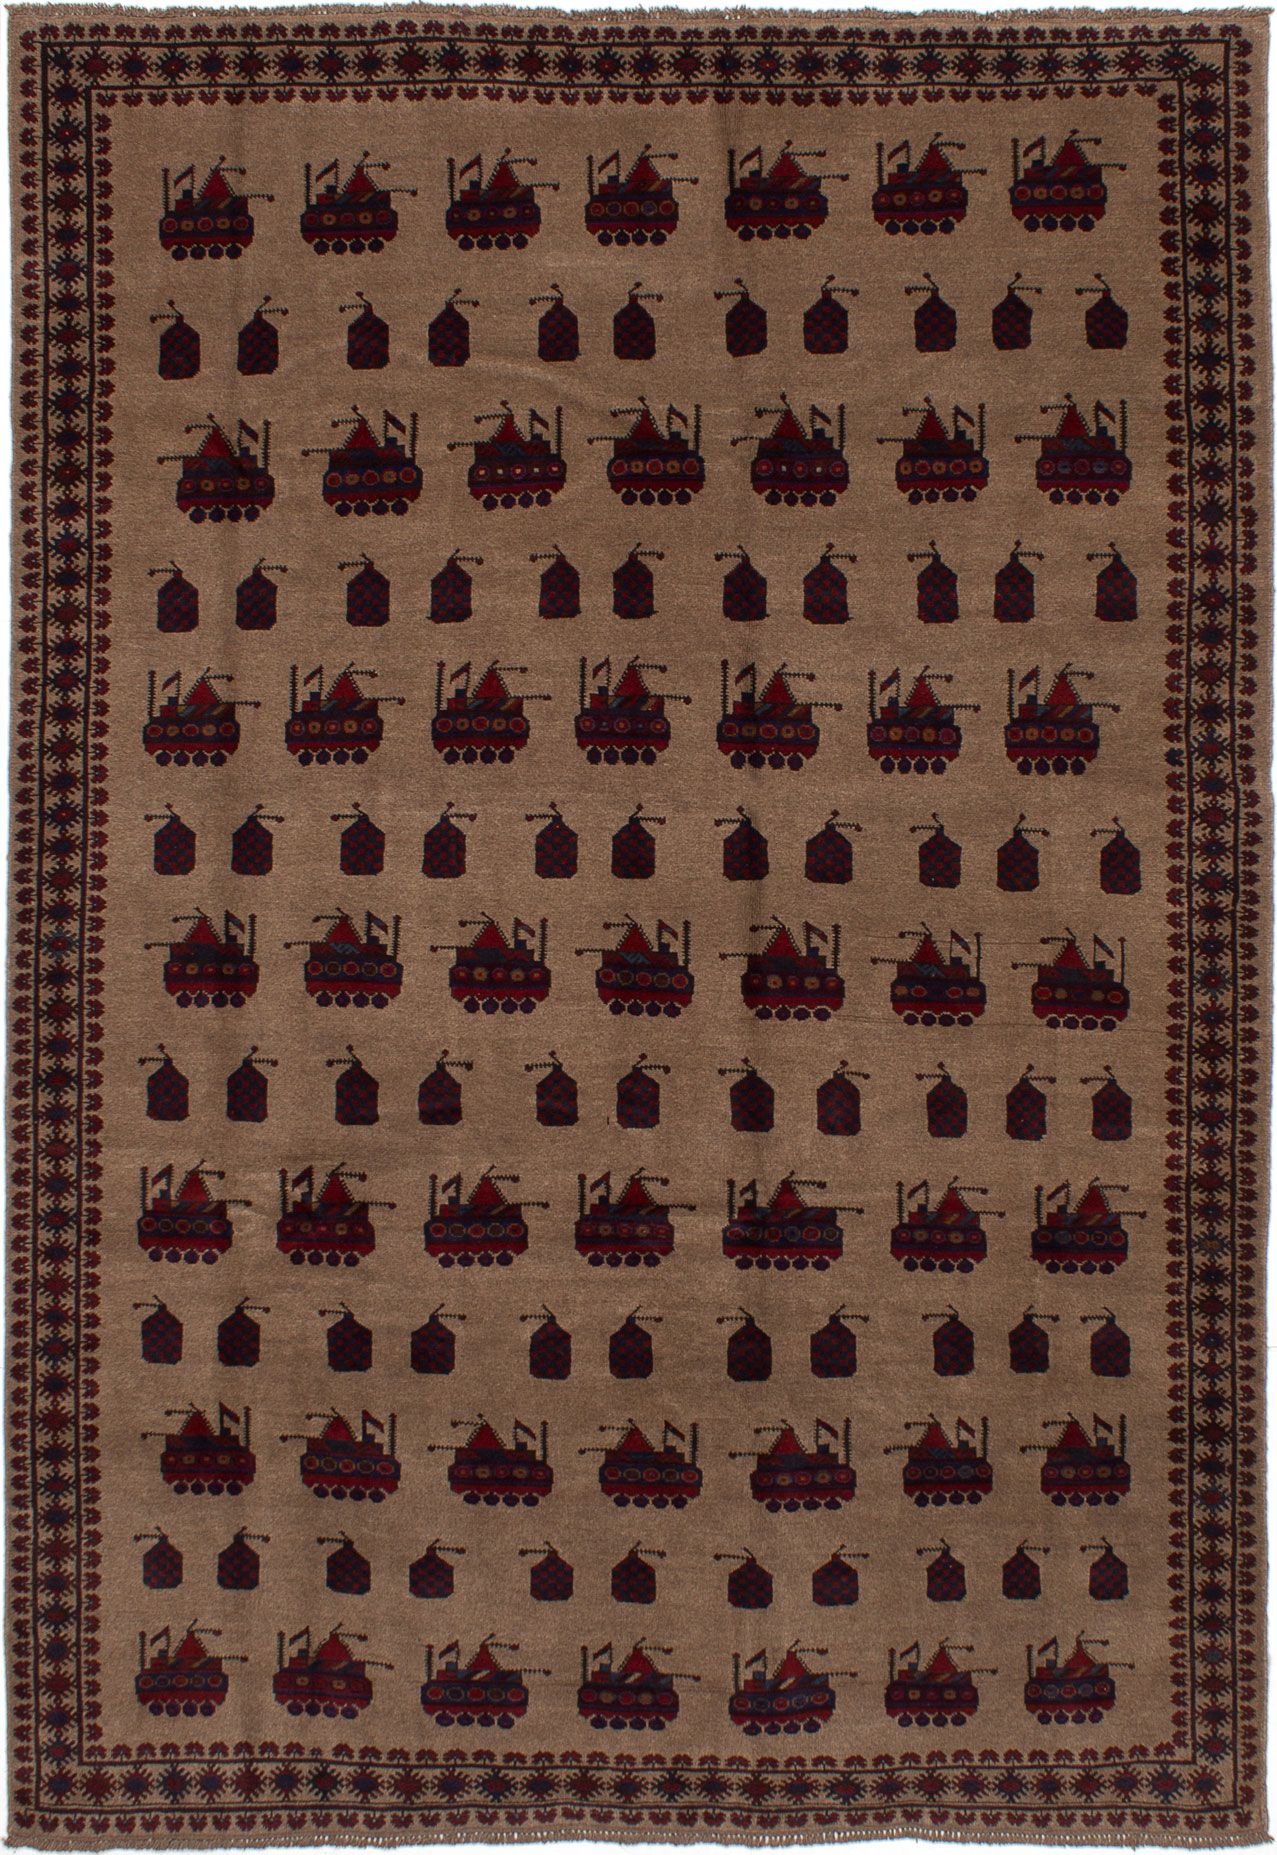 Hand-Knotted Wool Rug eCarpet Gallery Large Area Rug for Living Room Bedroom 360352 Finest Ghazni Bordered Red Rug 6'10 x 9'11 